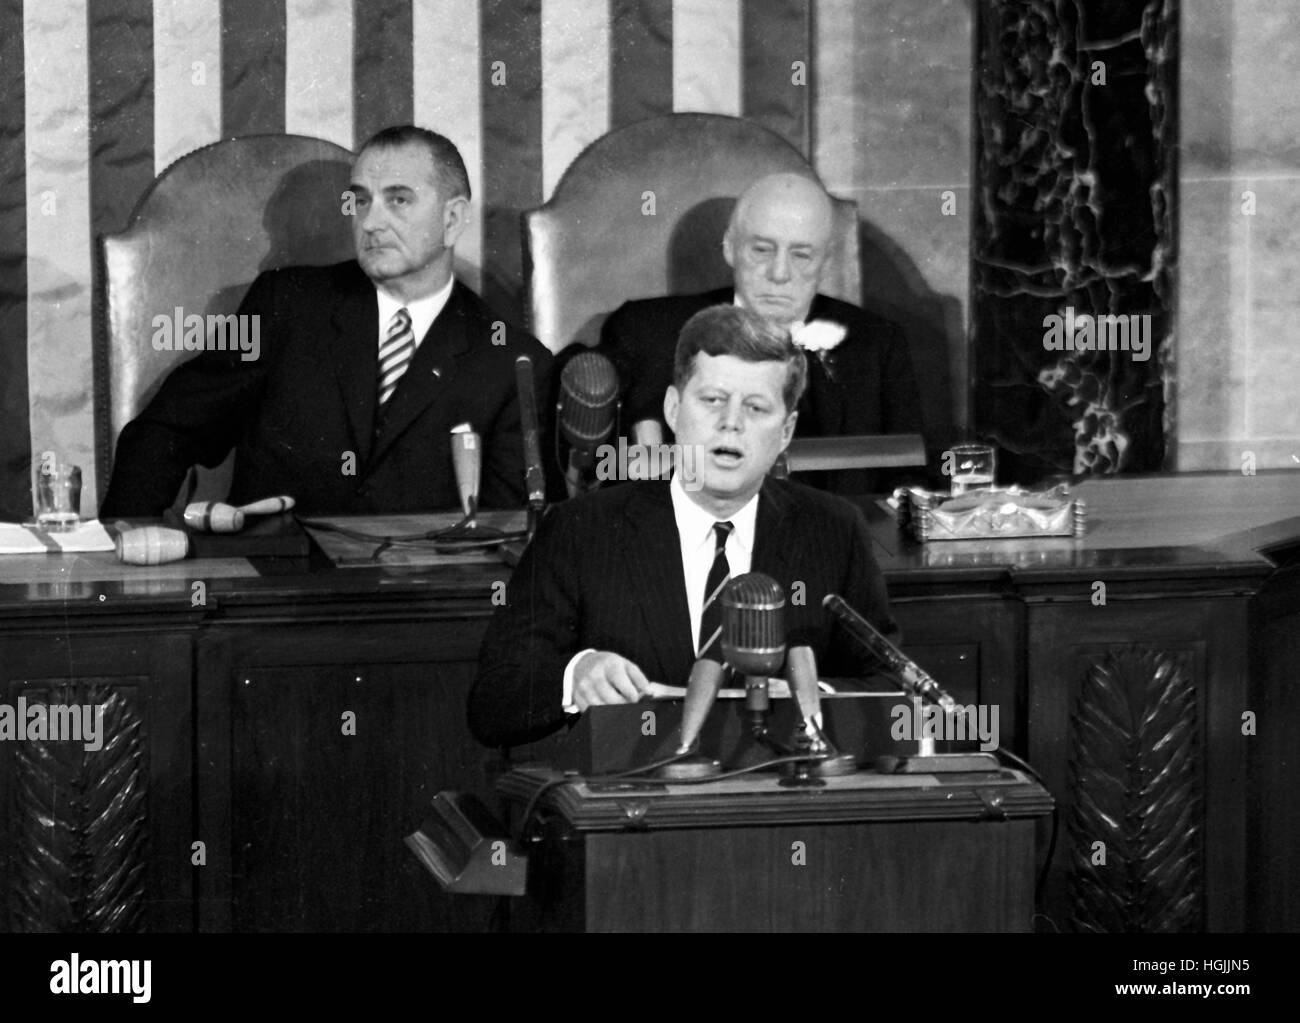 United States President John F. Kennedy outlined his vision for manned exploration of space to a Joint Session of the United States Congress, in Washington, DC on May 25, 1961 when he declared, '.I believe this nation should commit itself to achieving the goal, before this decade is out, of landing a man on the Moon and returning him safely to the Earth.' This goal was achieved when astronaut Neil A. Armstrong became the first human to set foot upon the Moon at 10:56 p.m. EDT, July 20, 1969. Shown in the background ar US Vice President Lyndon B. Johnson, left, and Speaker of the House Sam T. Stock Photo